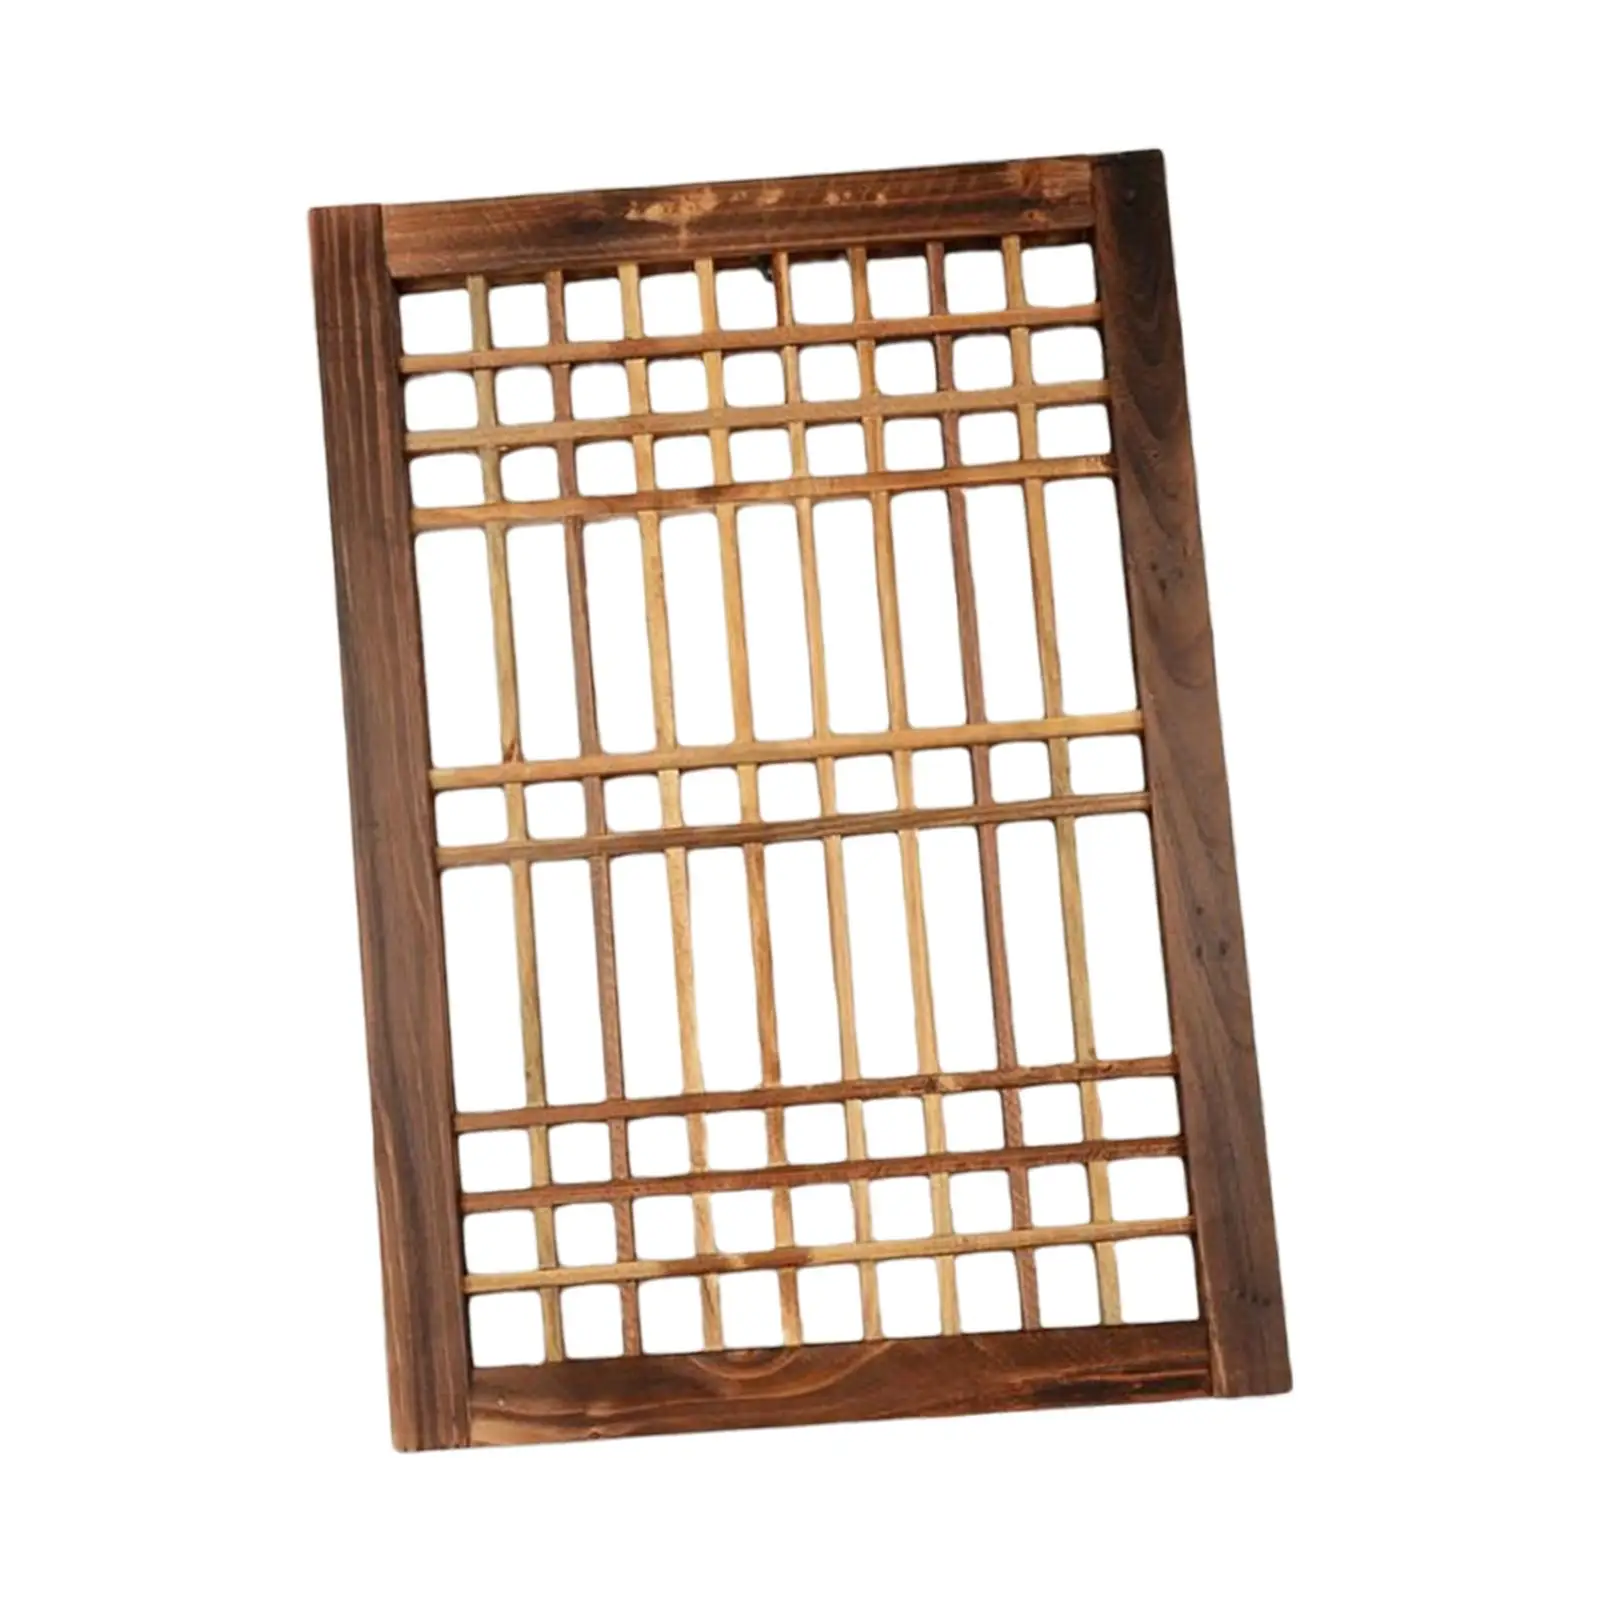 Wooden Lattice Window Frame for Window, Wall Pediment for Entrance, Living Room Easy to Hang Simple Old Style Vintage Light